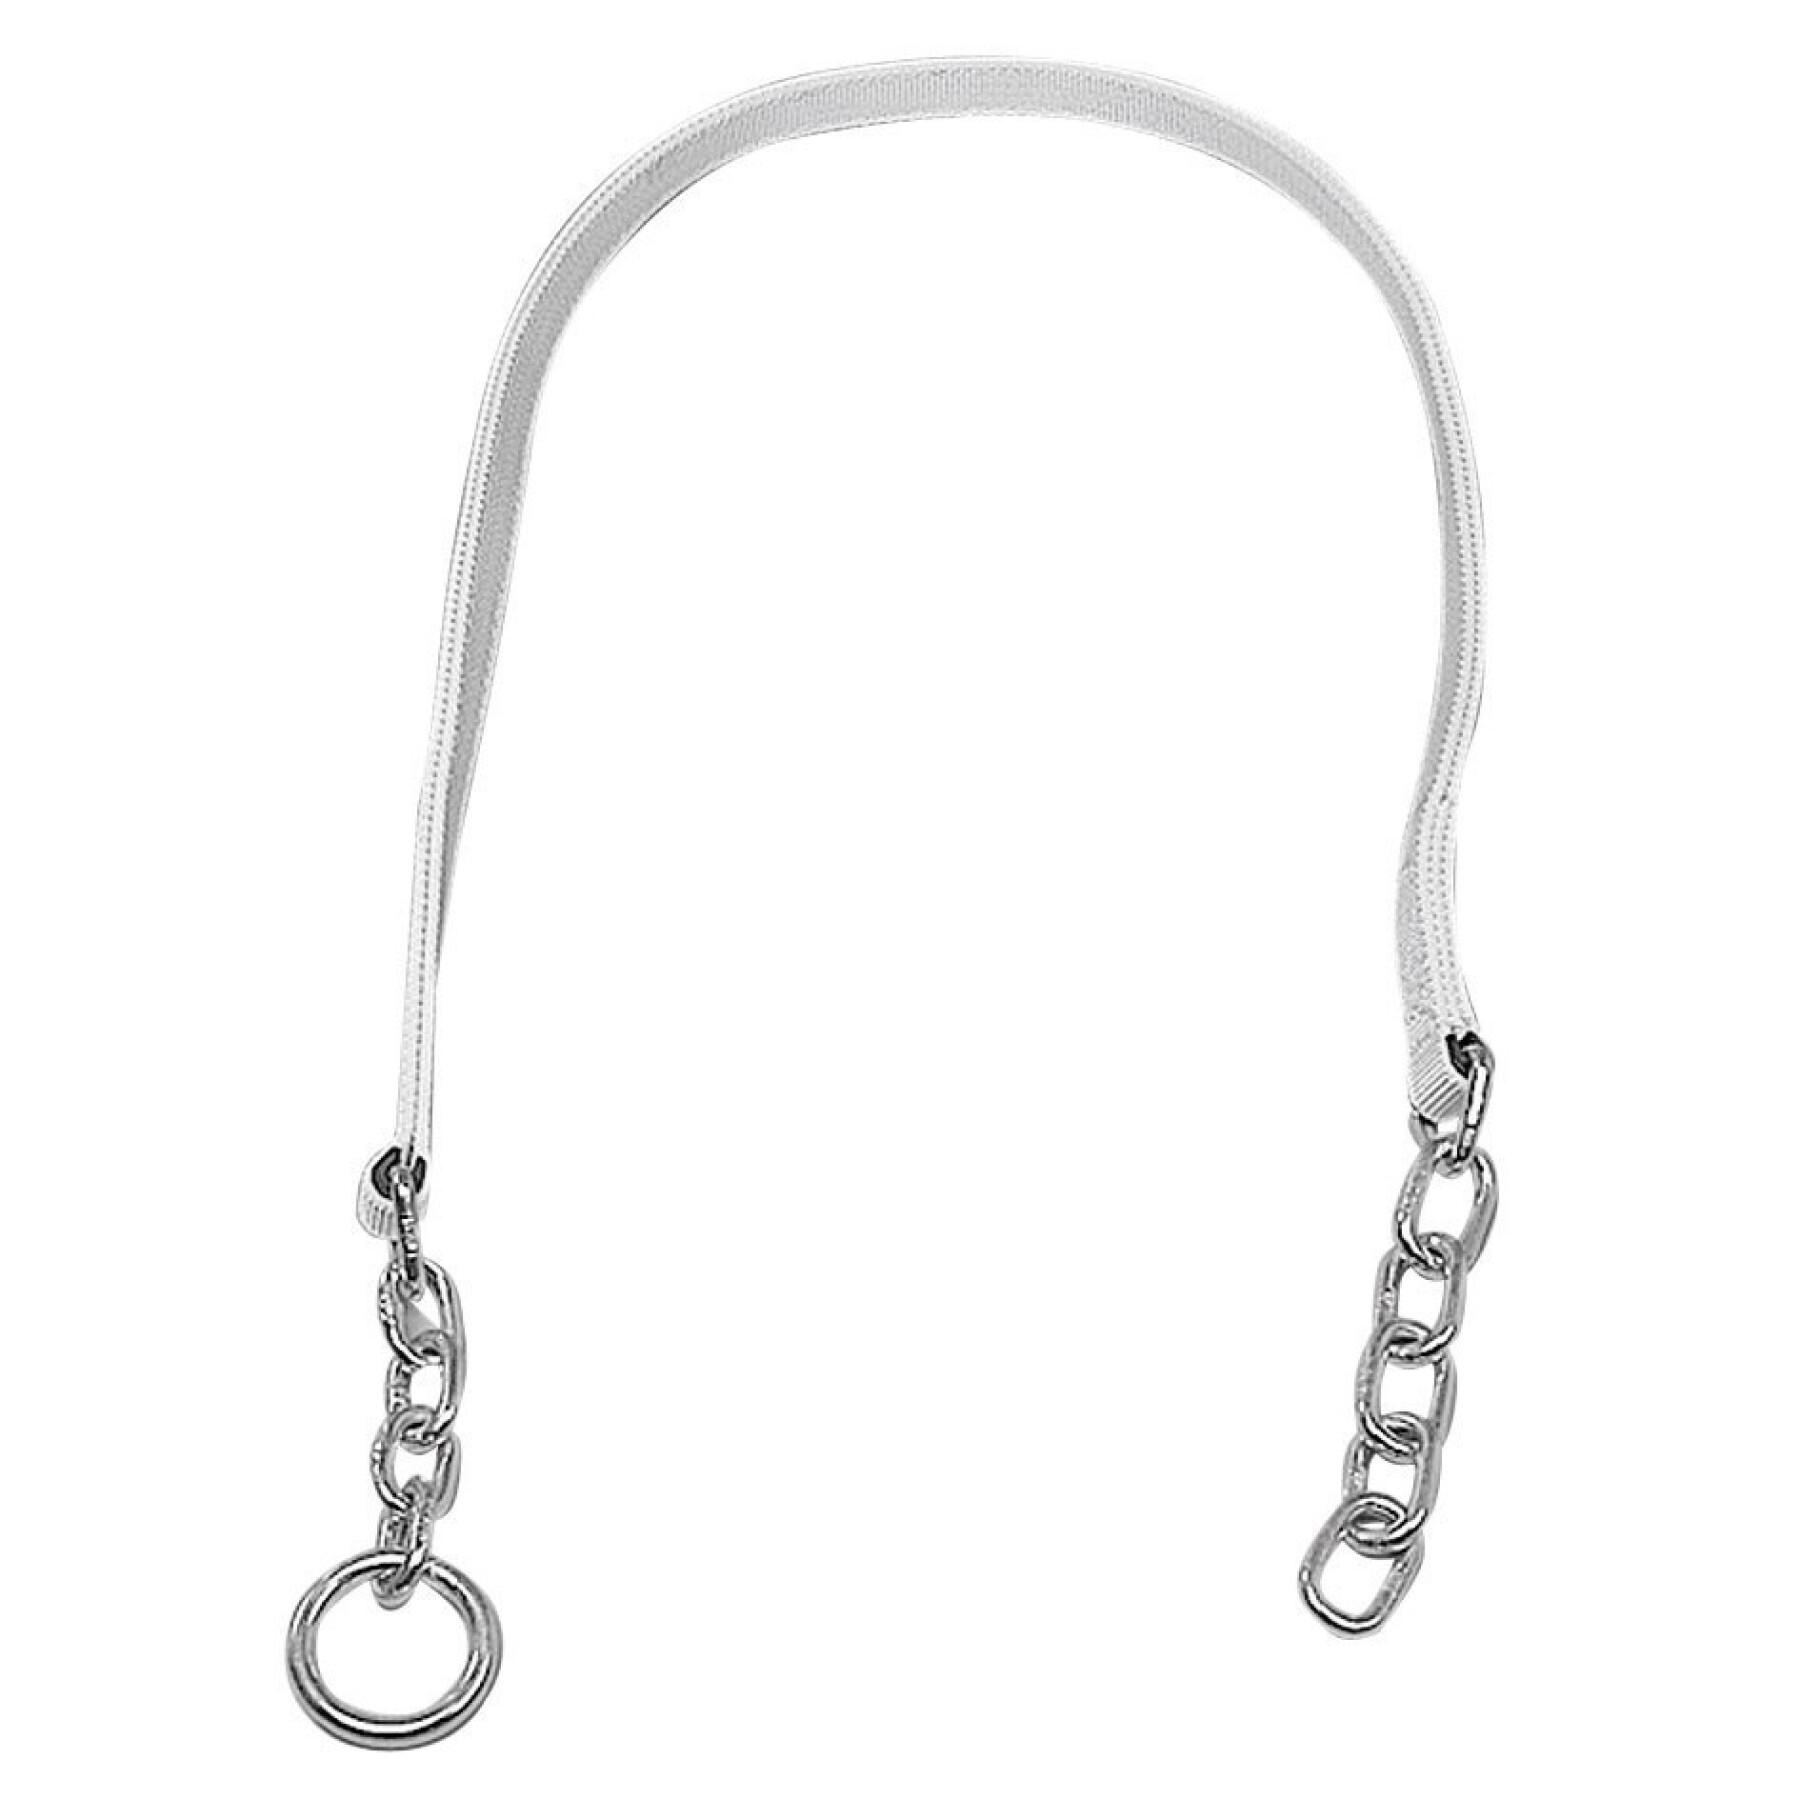 Cattle hitch with chain Kerbl W